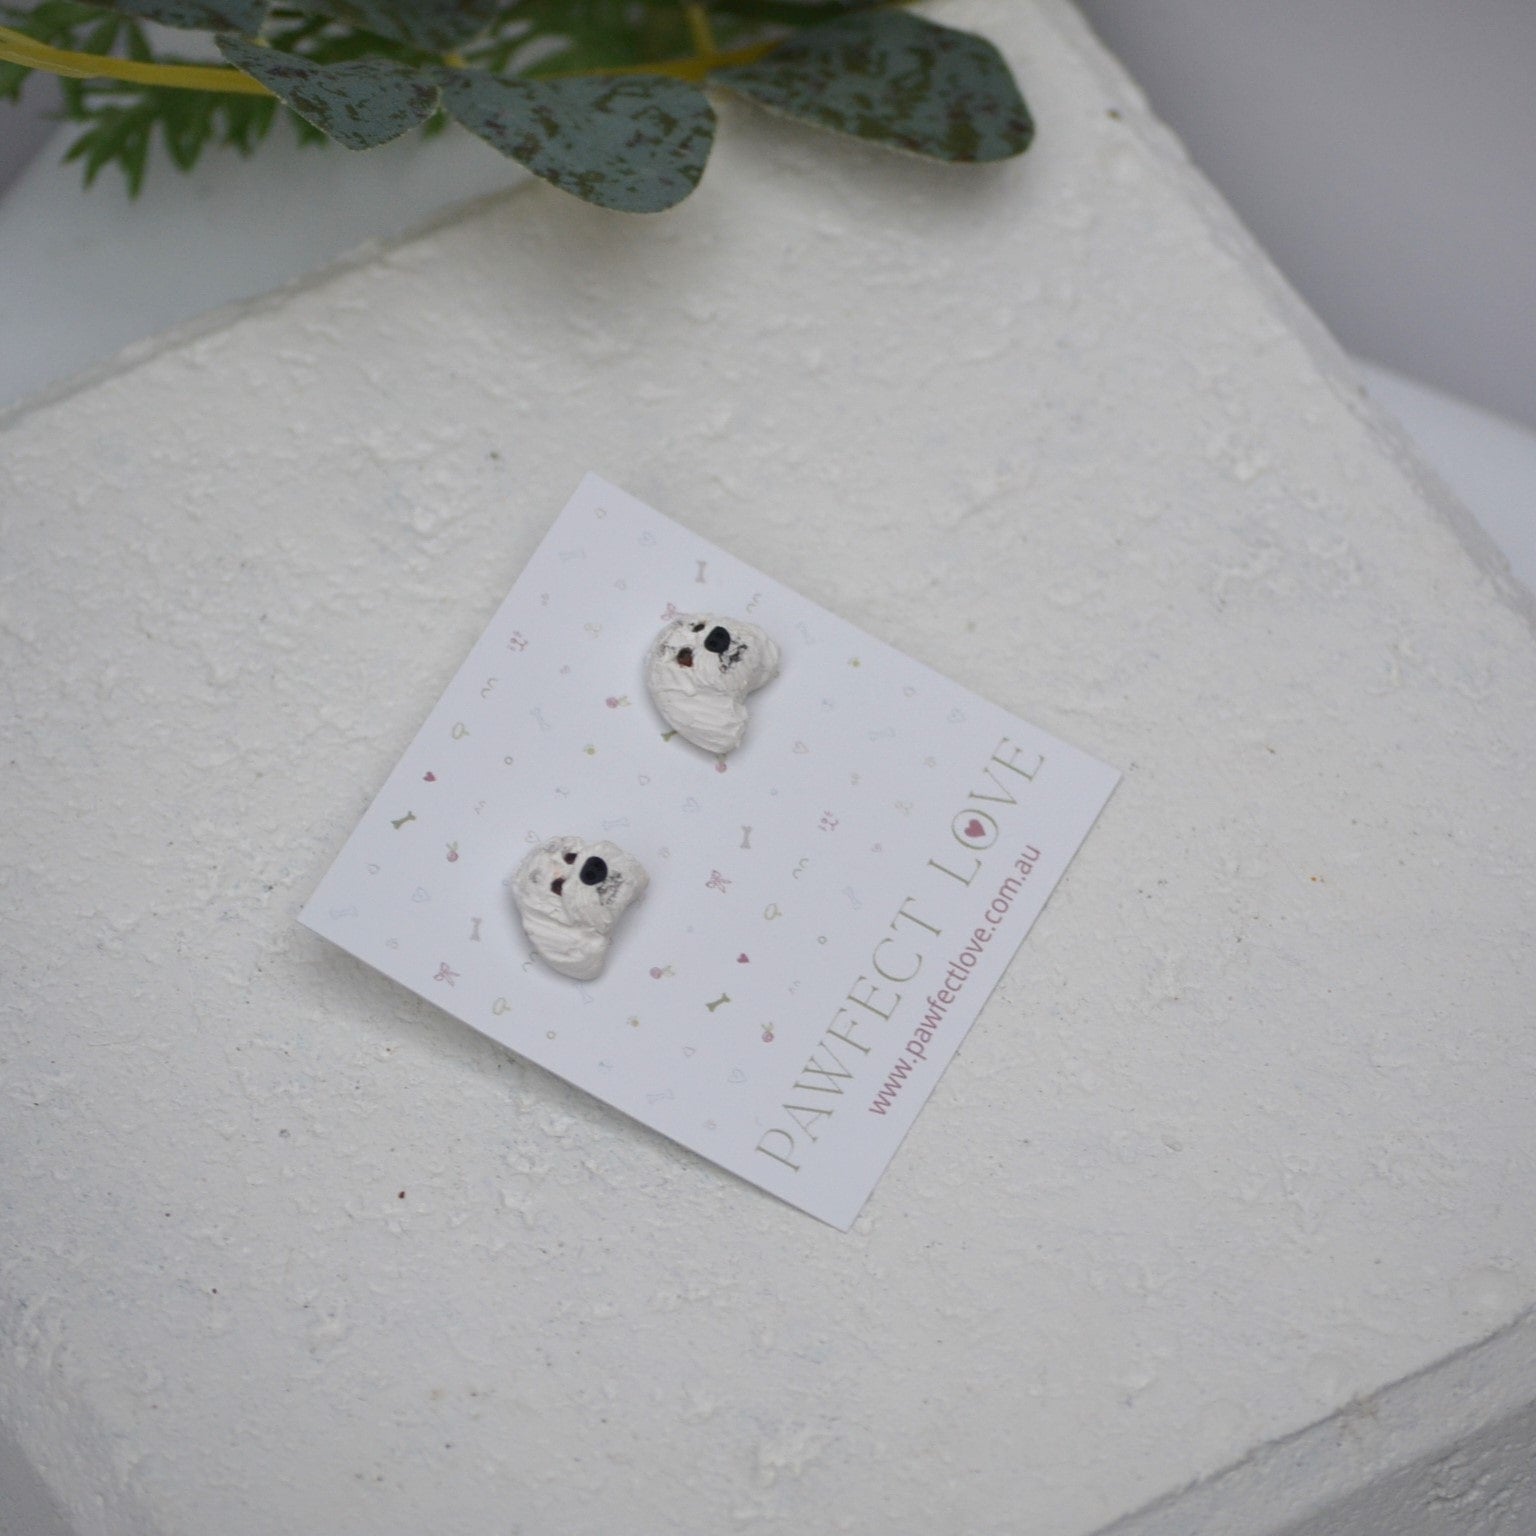 Handmade white poodle stud earrings by Pawfect Love, positioned in front of white paver